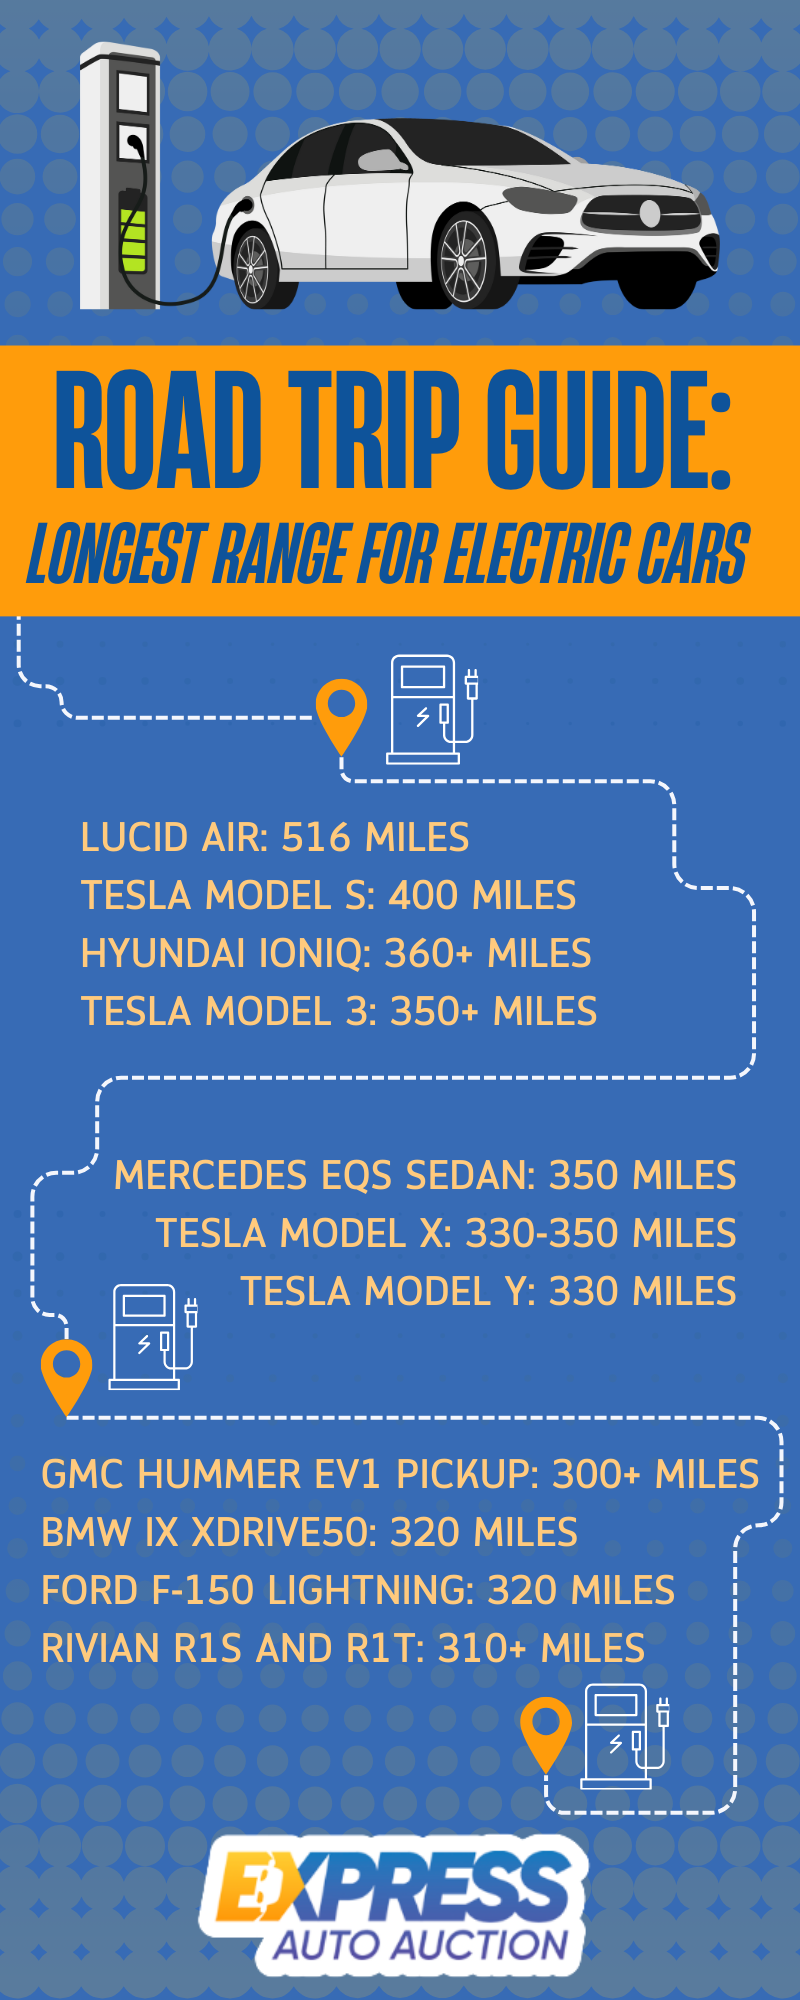 An infographic on the electric cars with the best range.